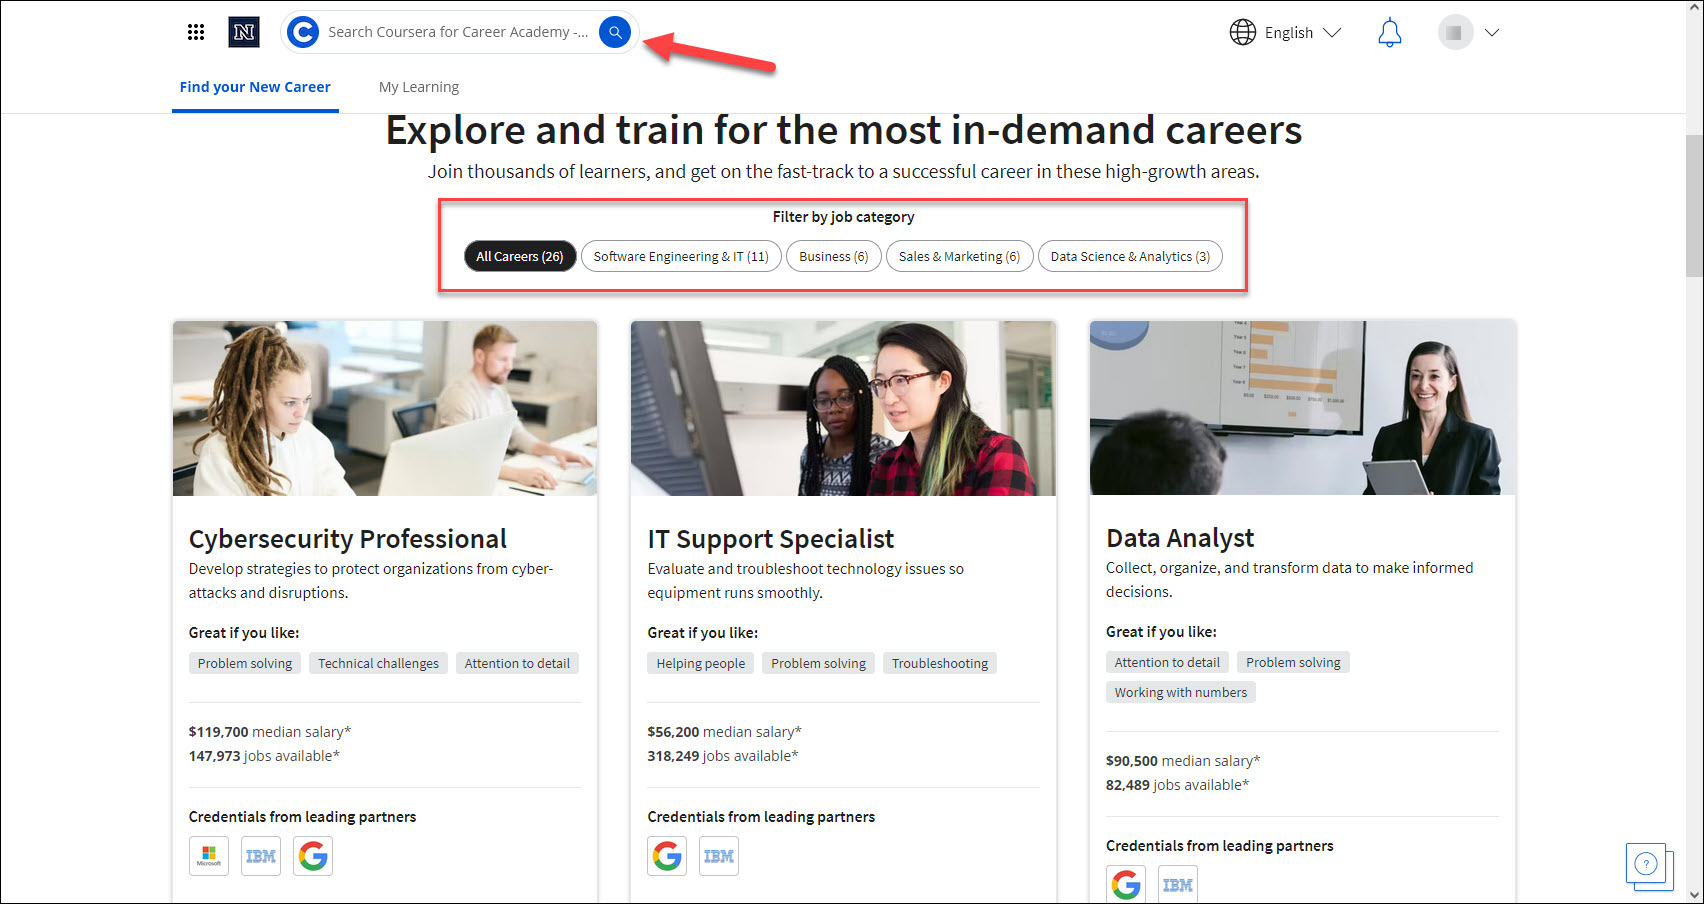 Screen shot of UNR Coursera Career Academy – Students home page shown after login, with default program credentials shown. There is a box around the Job Category filter to highlight the various filter options. An arrow highlights the main search tool.